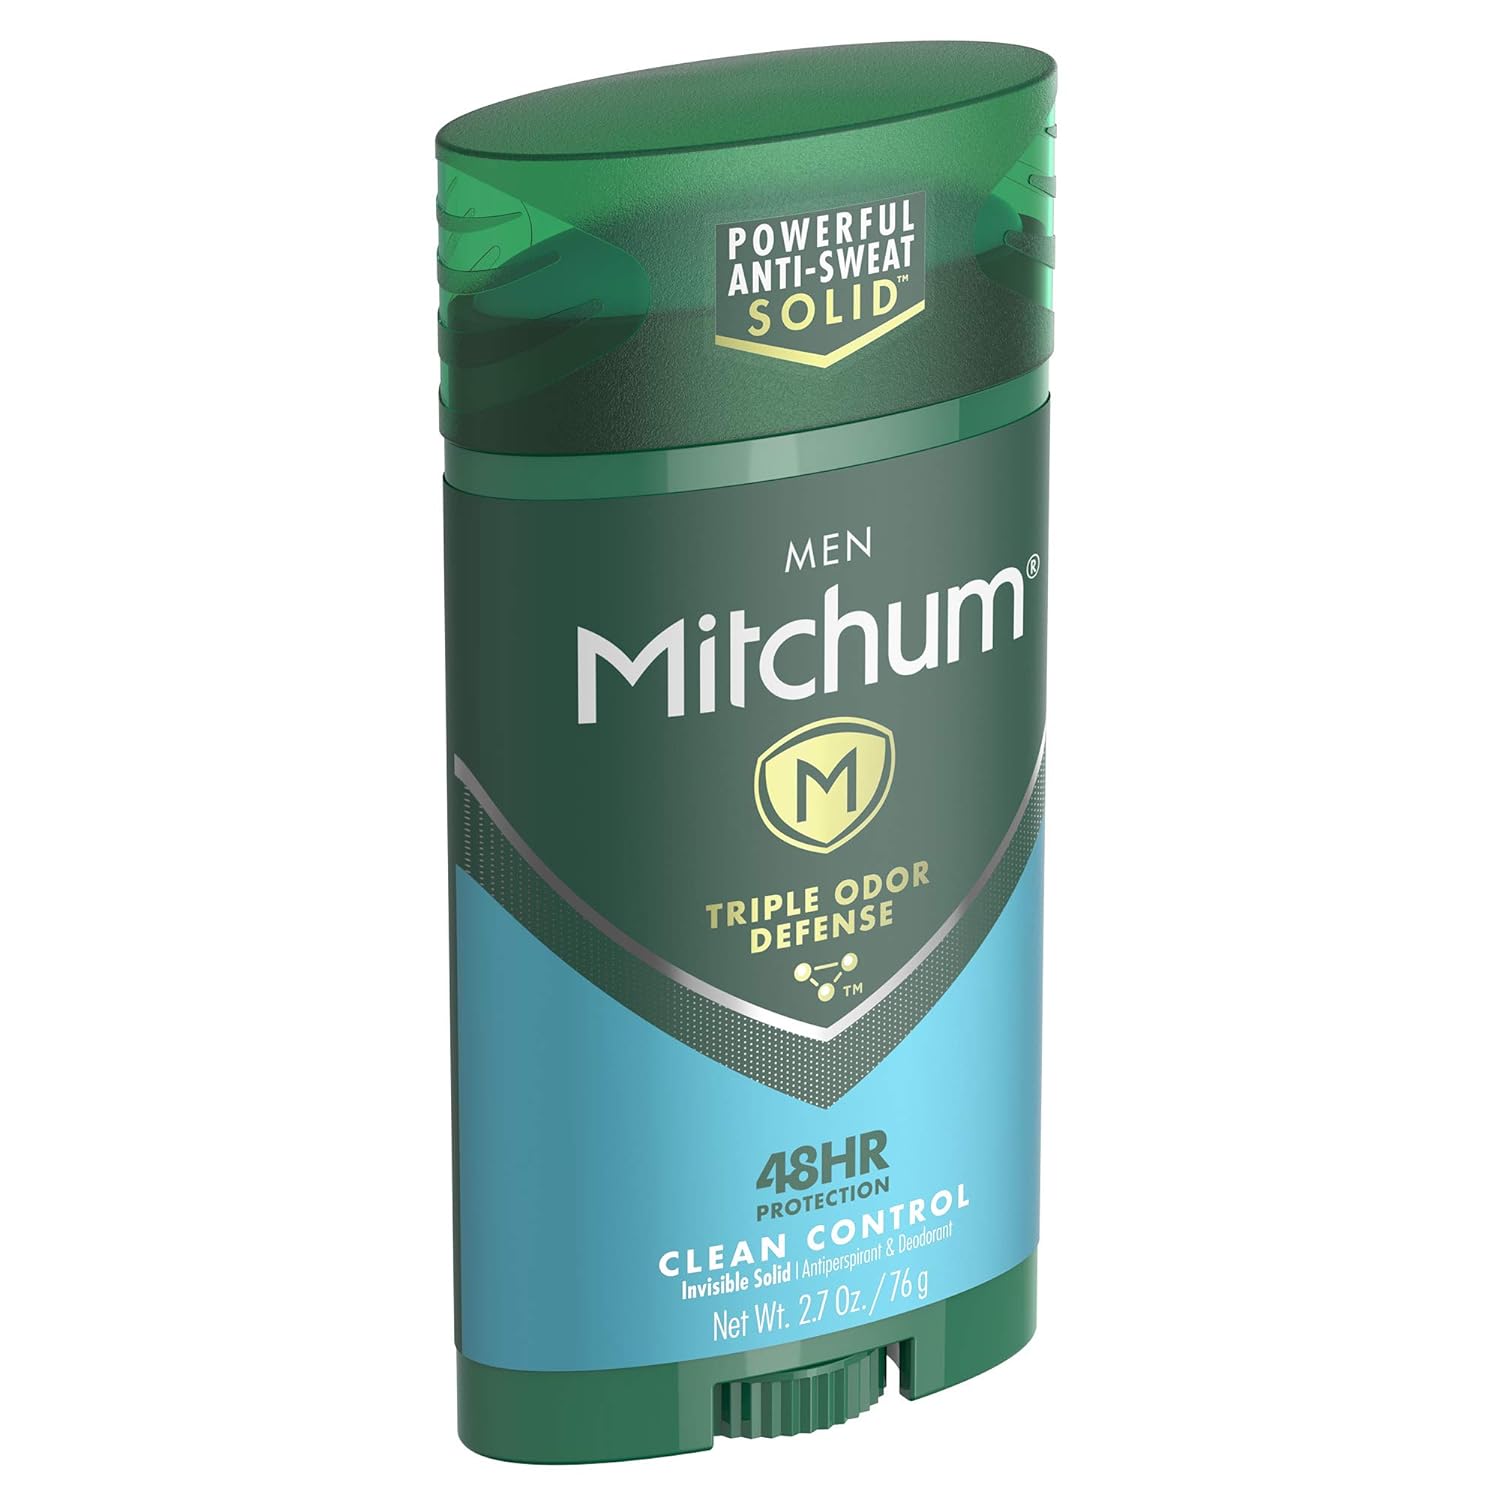 Amazon.com: Mitchum Antiperspirant Deodorant Stick for Men, Triple Odor  Defense Invisible Solid, 48 Hr Protection, Dermatologist Tested, Clean  Control, 2.7 oz: Beauty